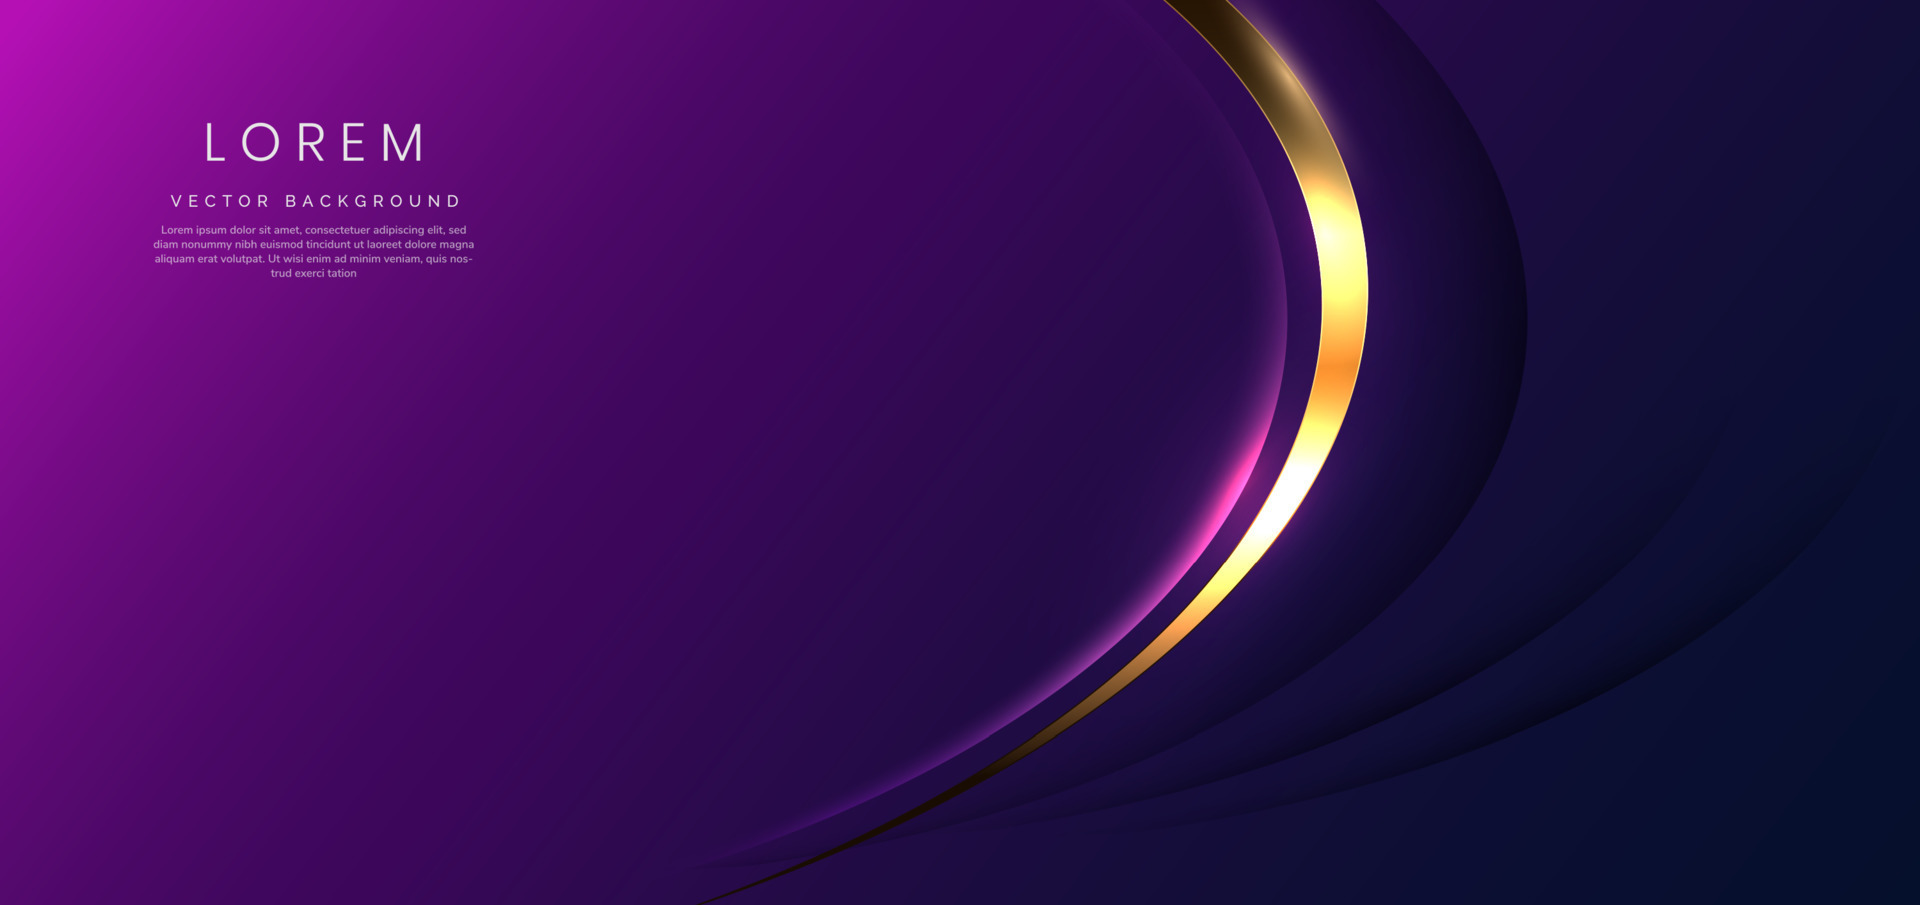 Get the most luxurious Background luxury purple for your device